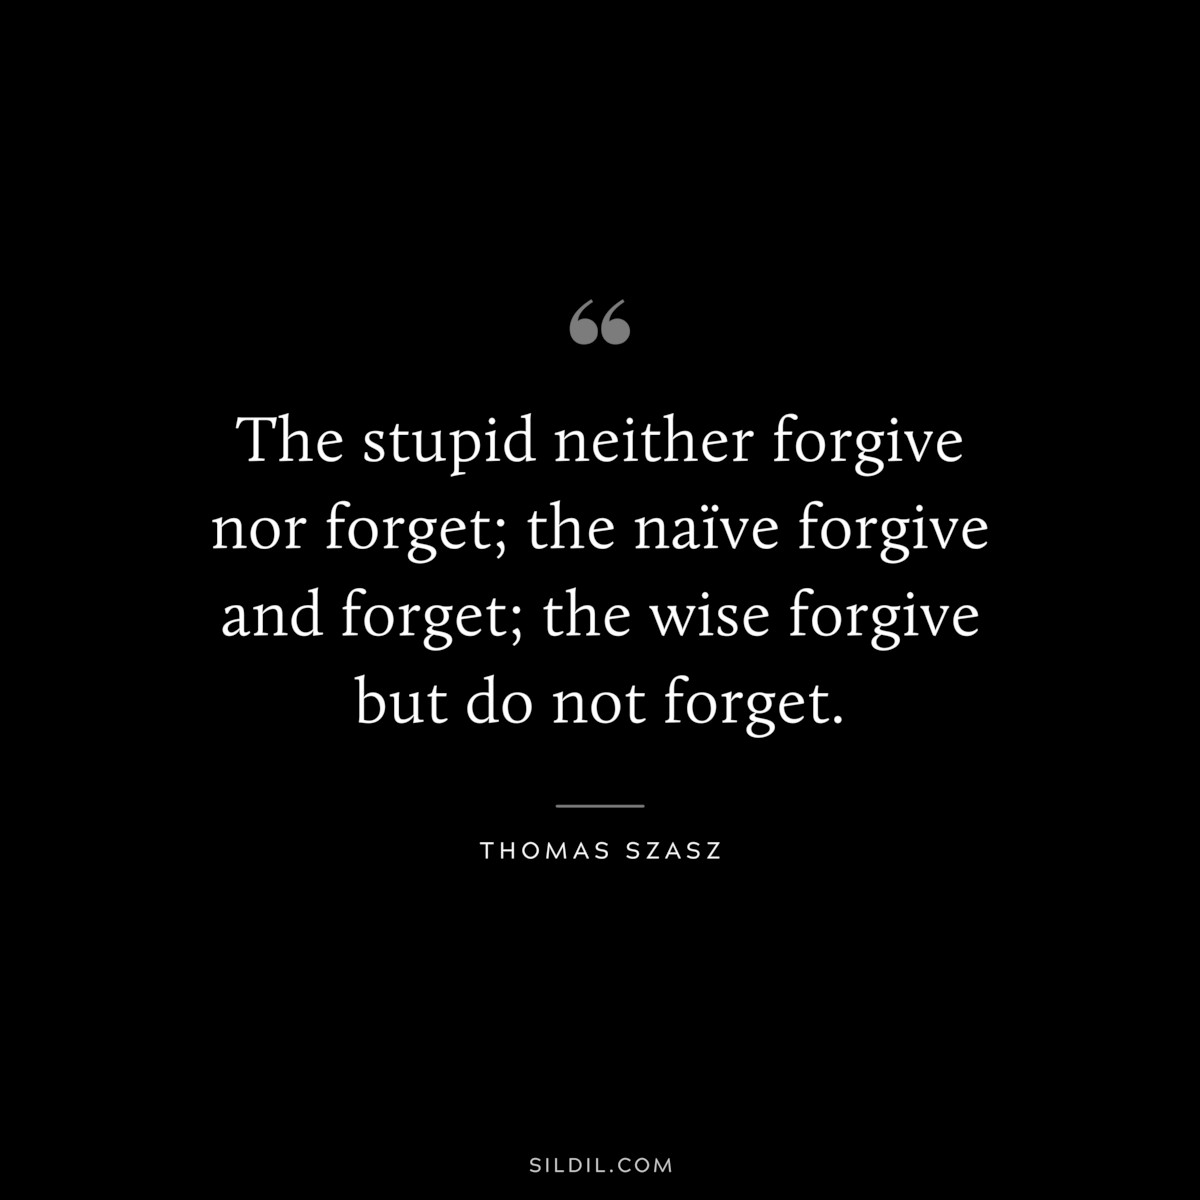 The stupid neither forgive nor forget; the naïve forgive and forget; the wise forgive but do not forget. ― Thomas Szasz